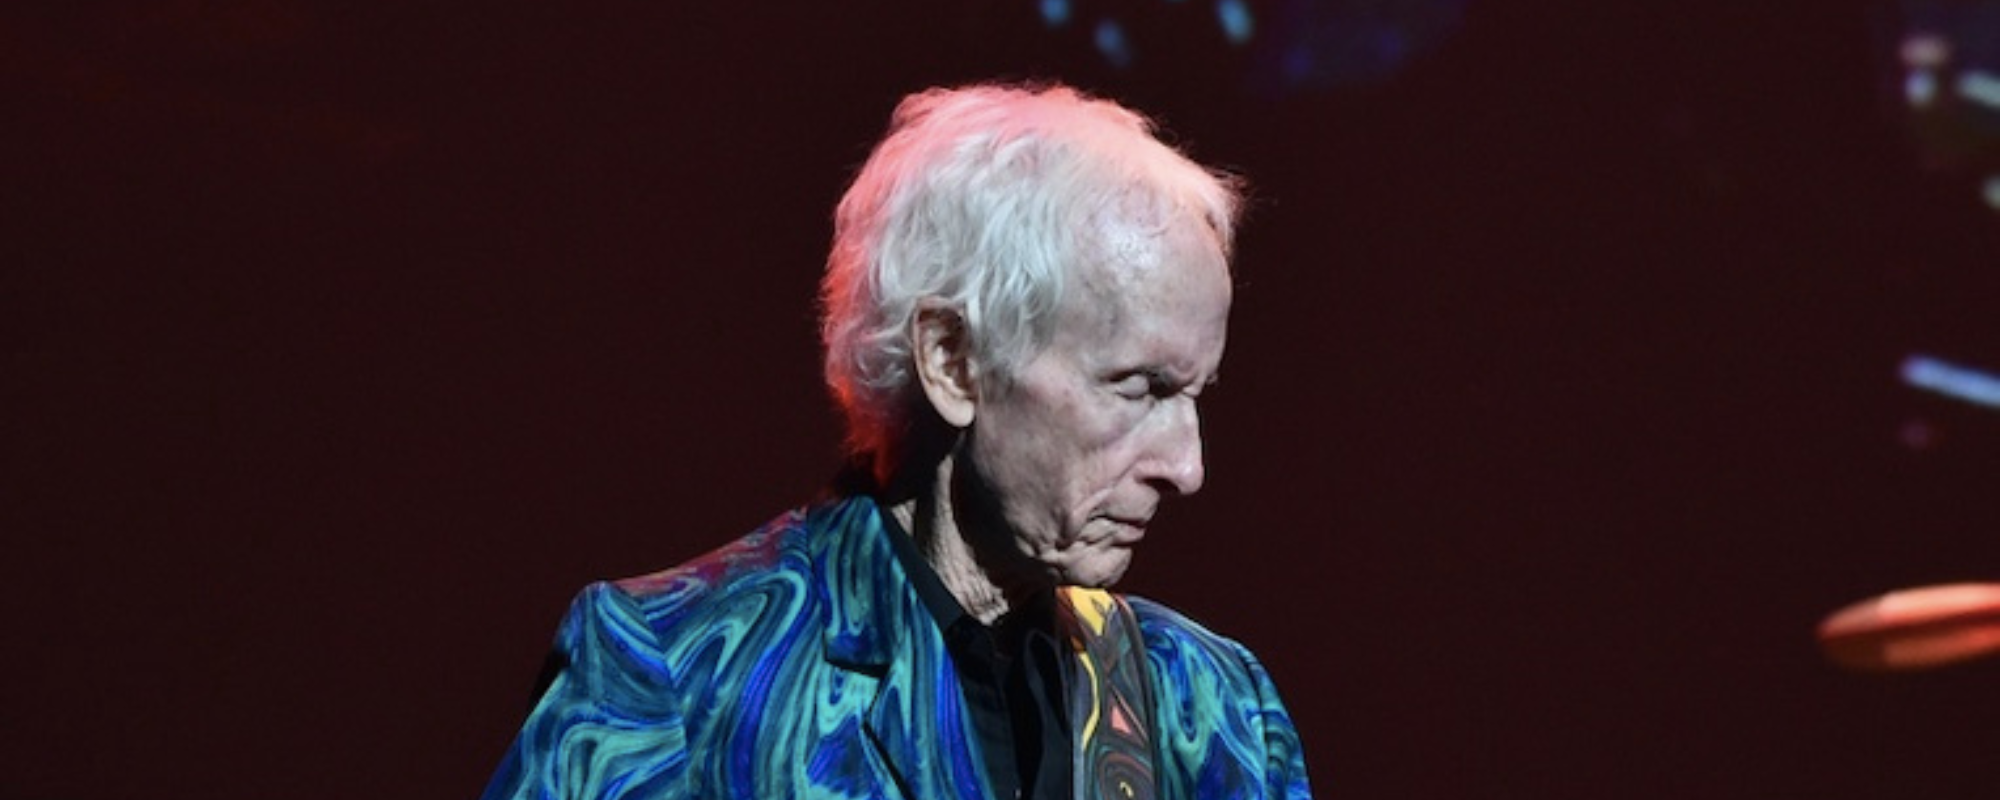 Doors Guitarist Robby Krieger to Release Debut Album with New Band The Soul Savages in January